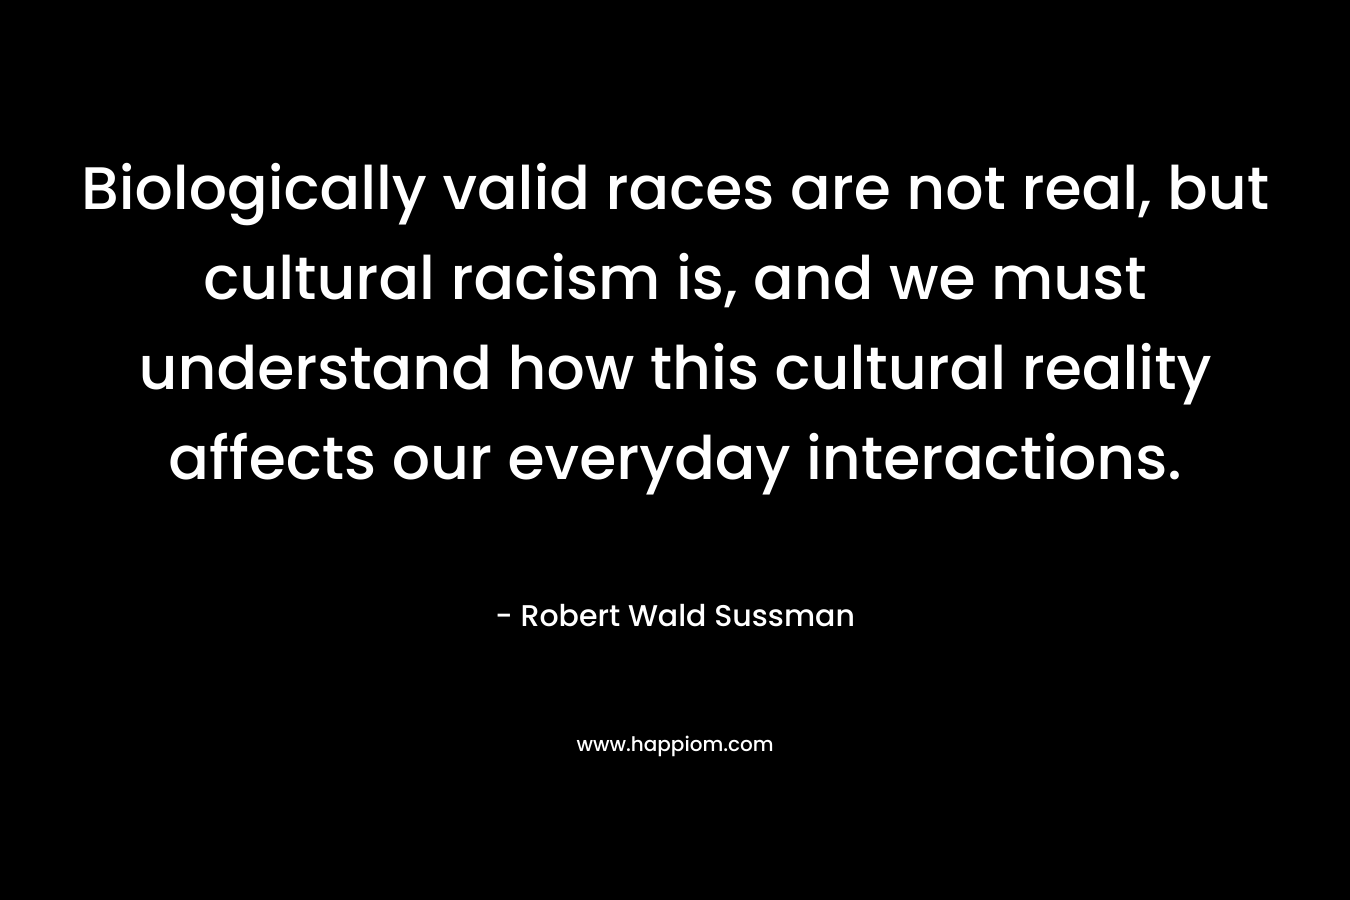 Biologically valid races are not real, but cultural racism is, and we must understand how this cultural reality affects our everyday interactions.